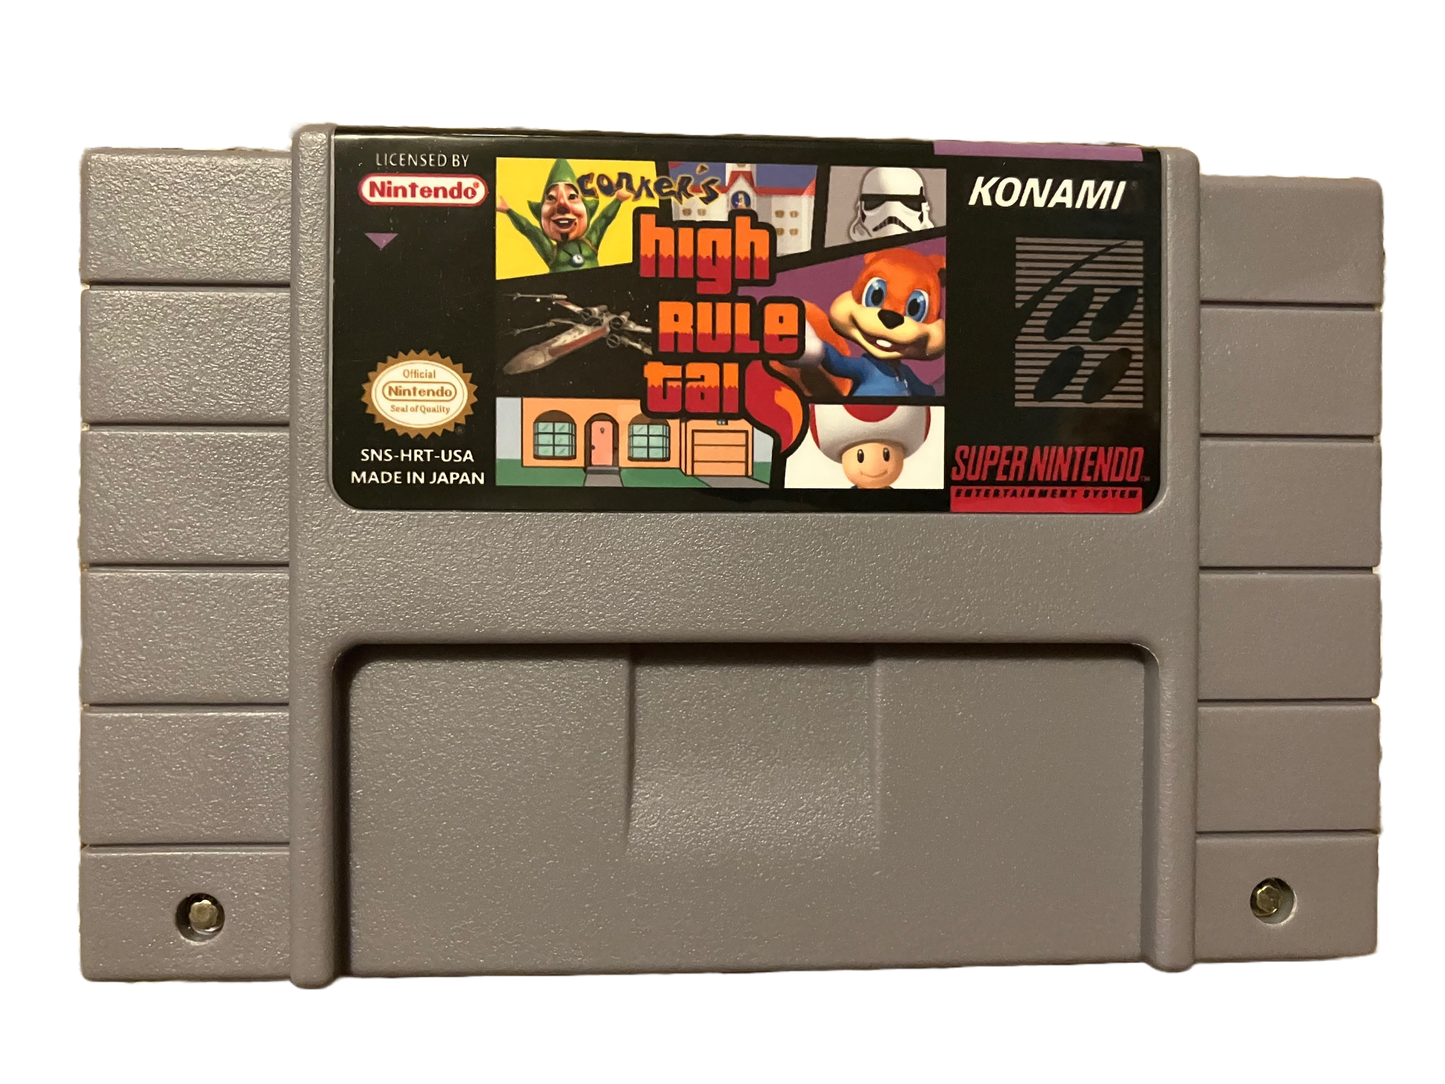 Conkers High Tale Rule Super Nintendo SNES Video Game – Puzzles LTD